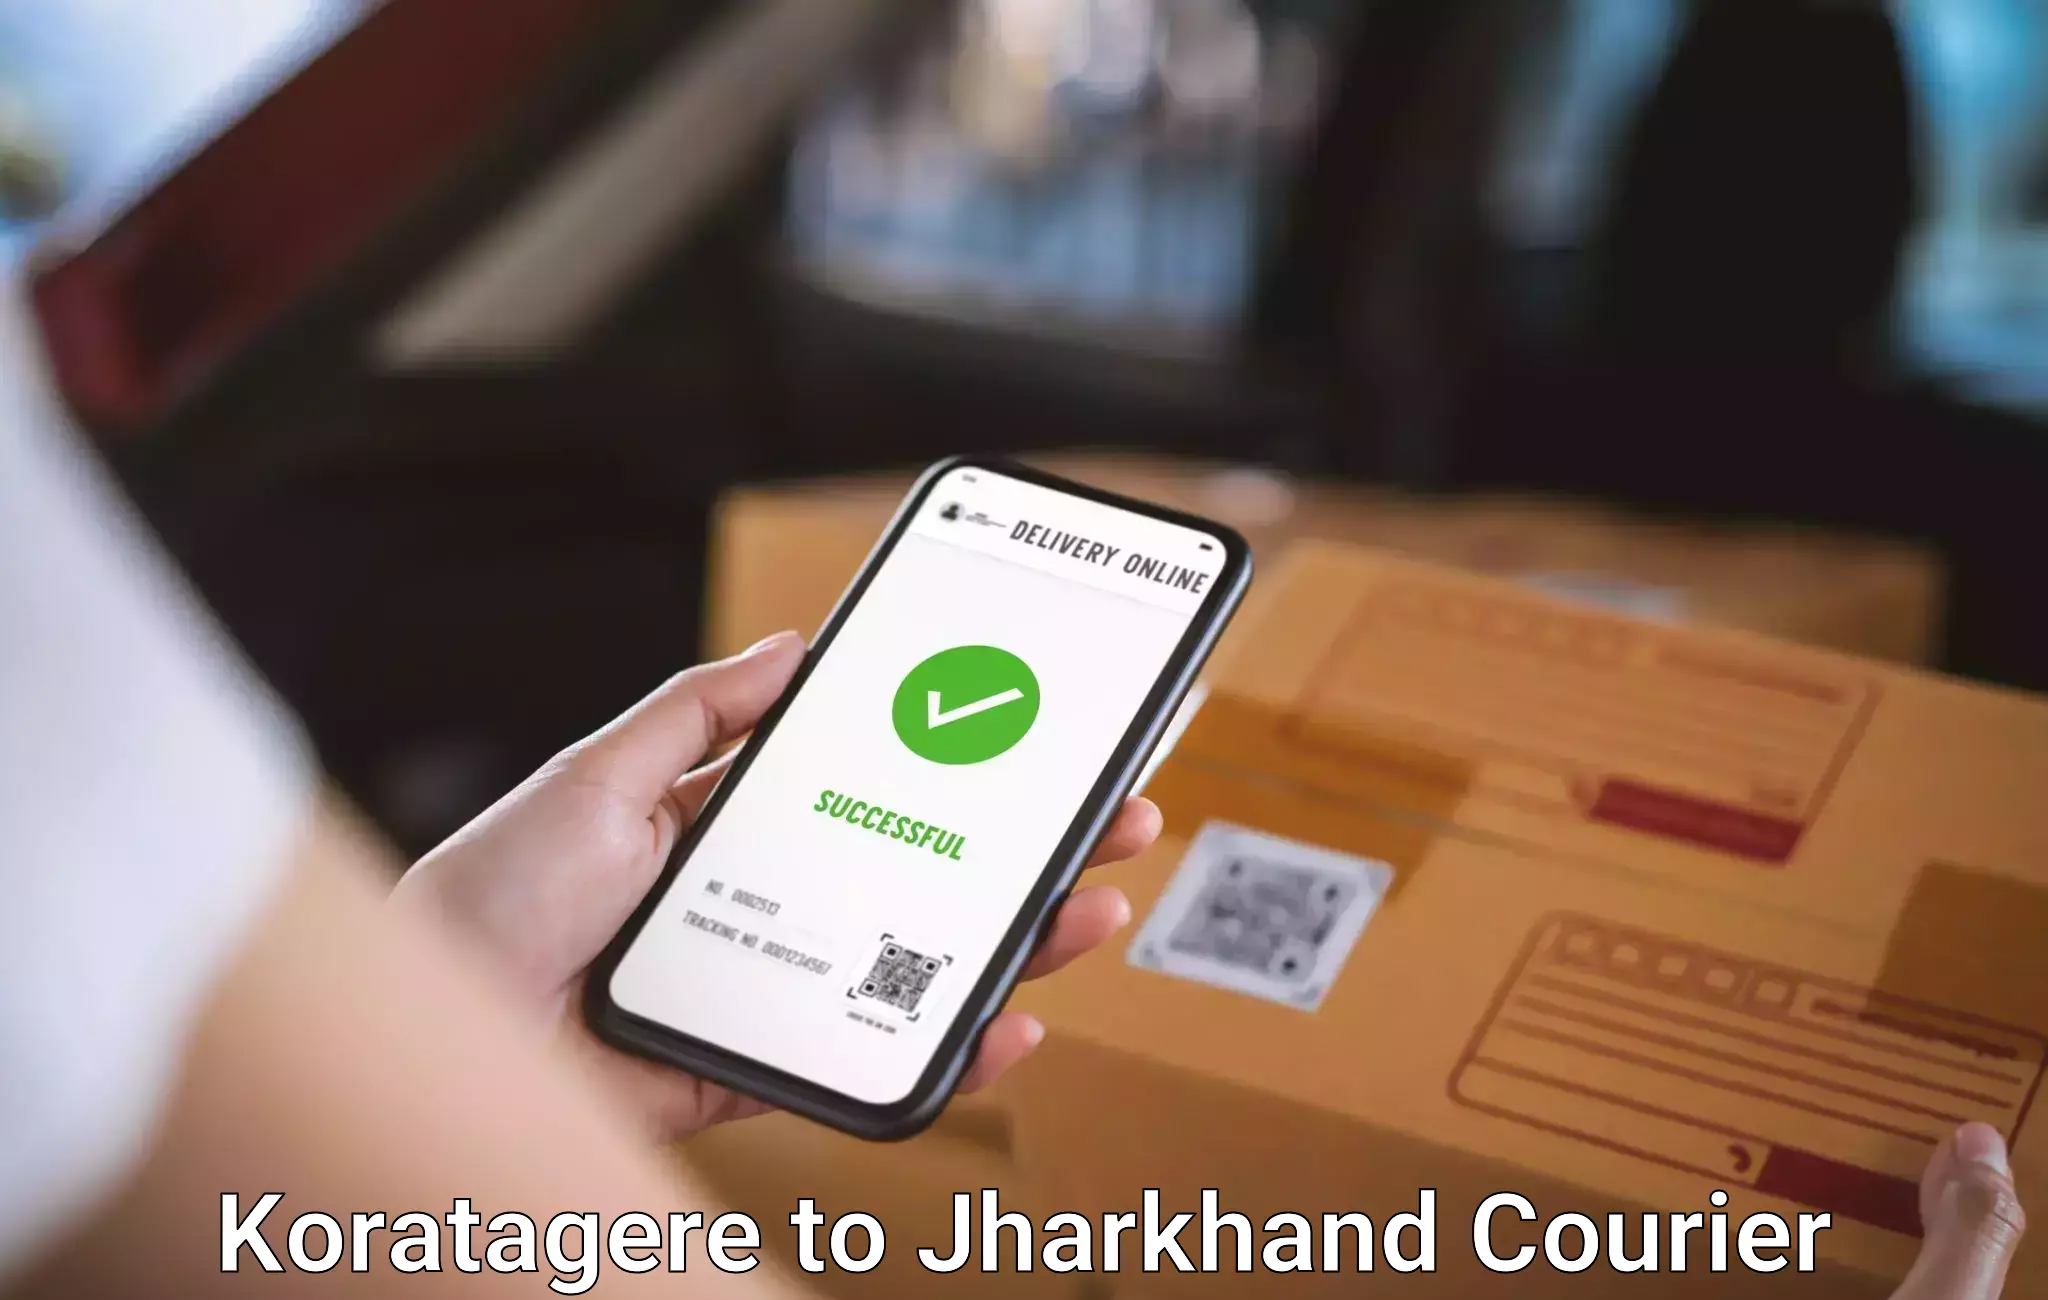 Emergency baggage service Koratagere to Jharkhand